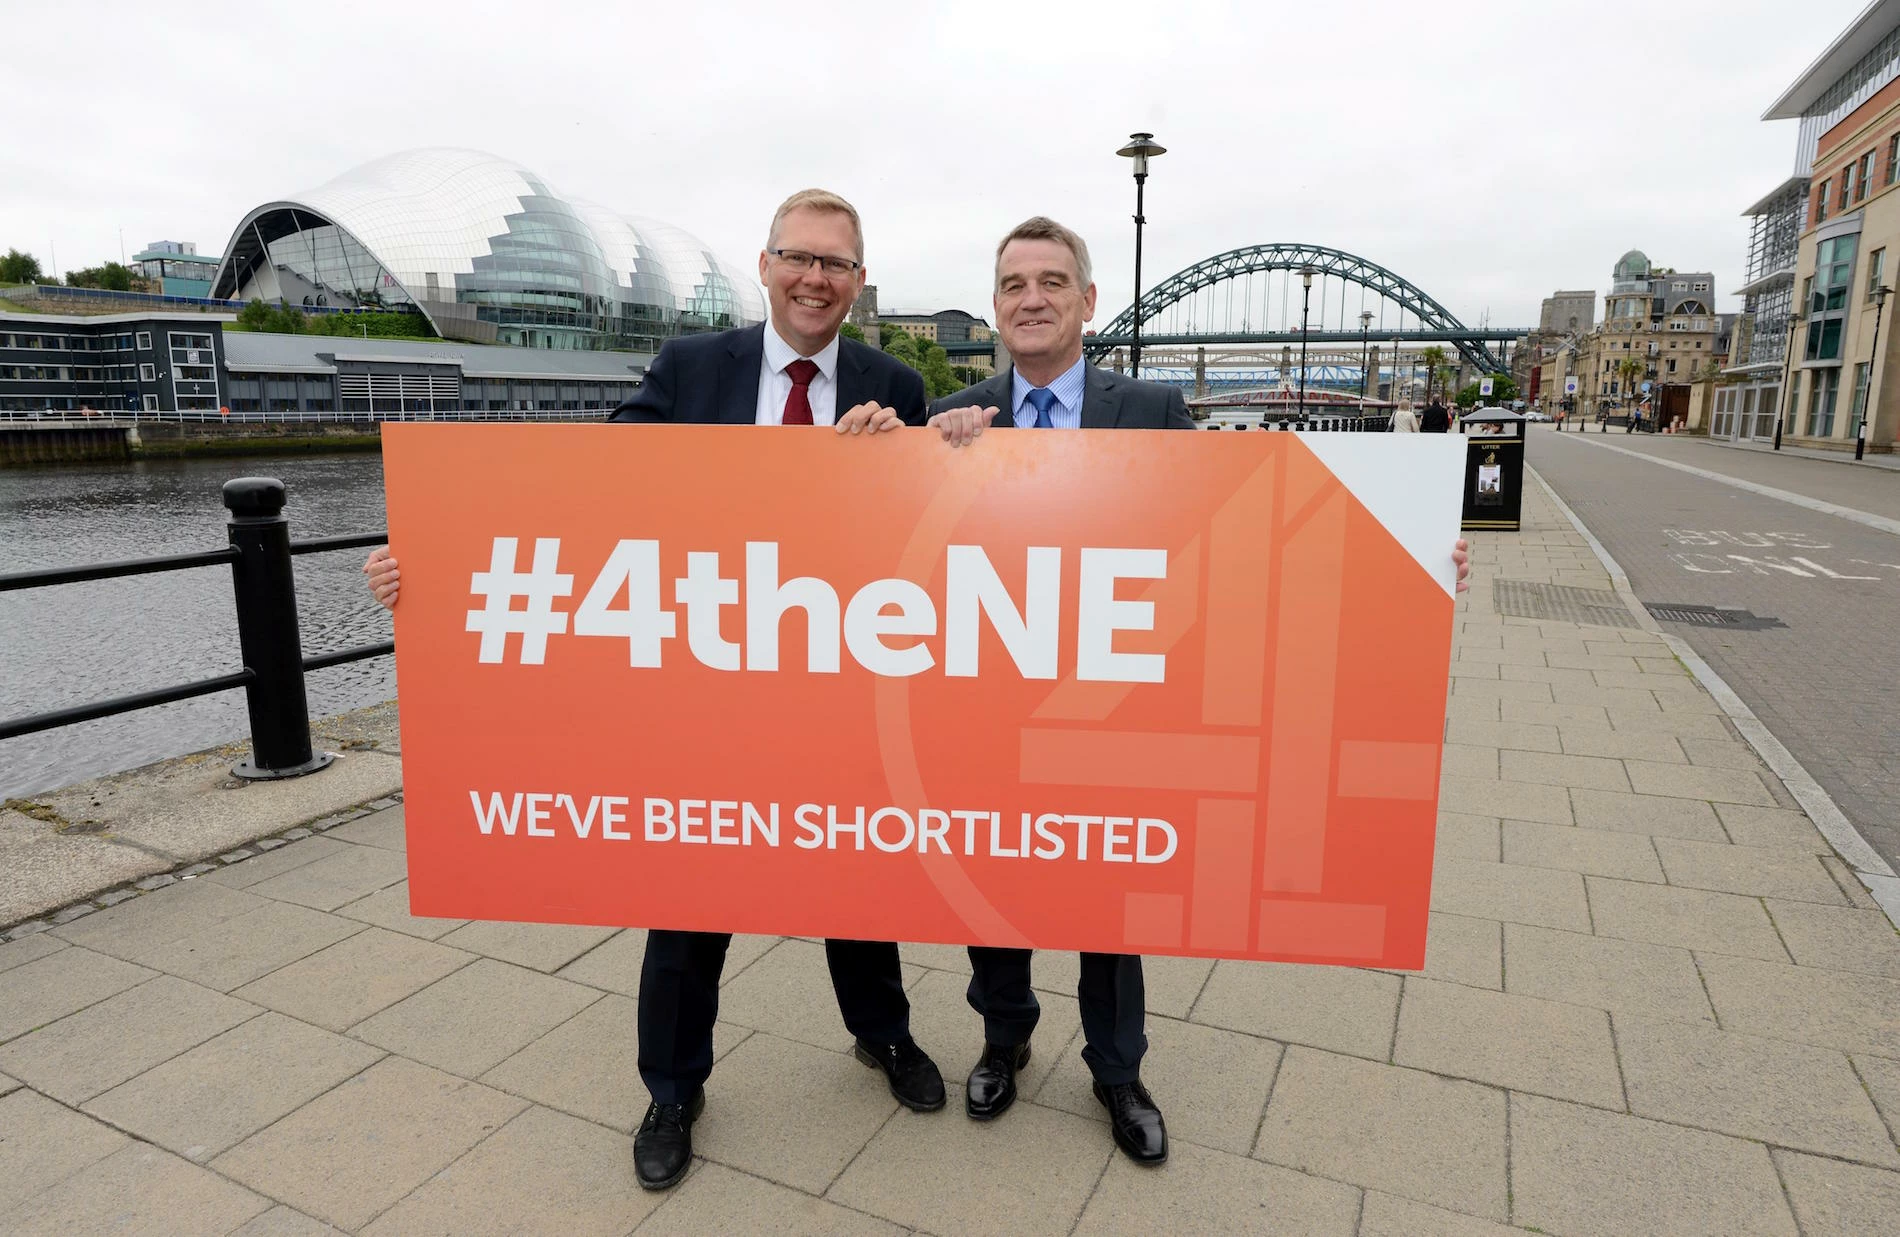  Cllr Nick Forbes – leader of Newcastle City Council, Cllr Martin Gannon – leader of Gateshead Council